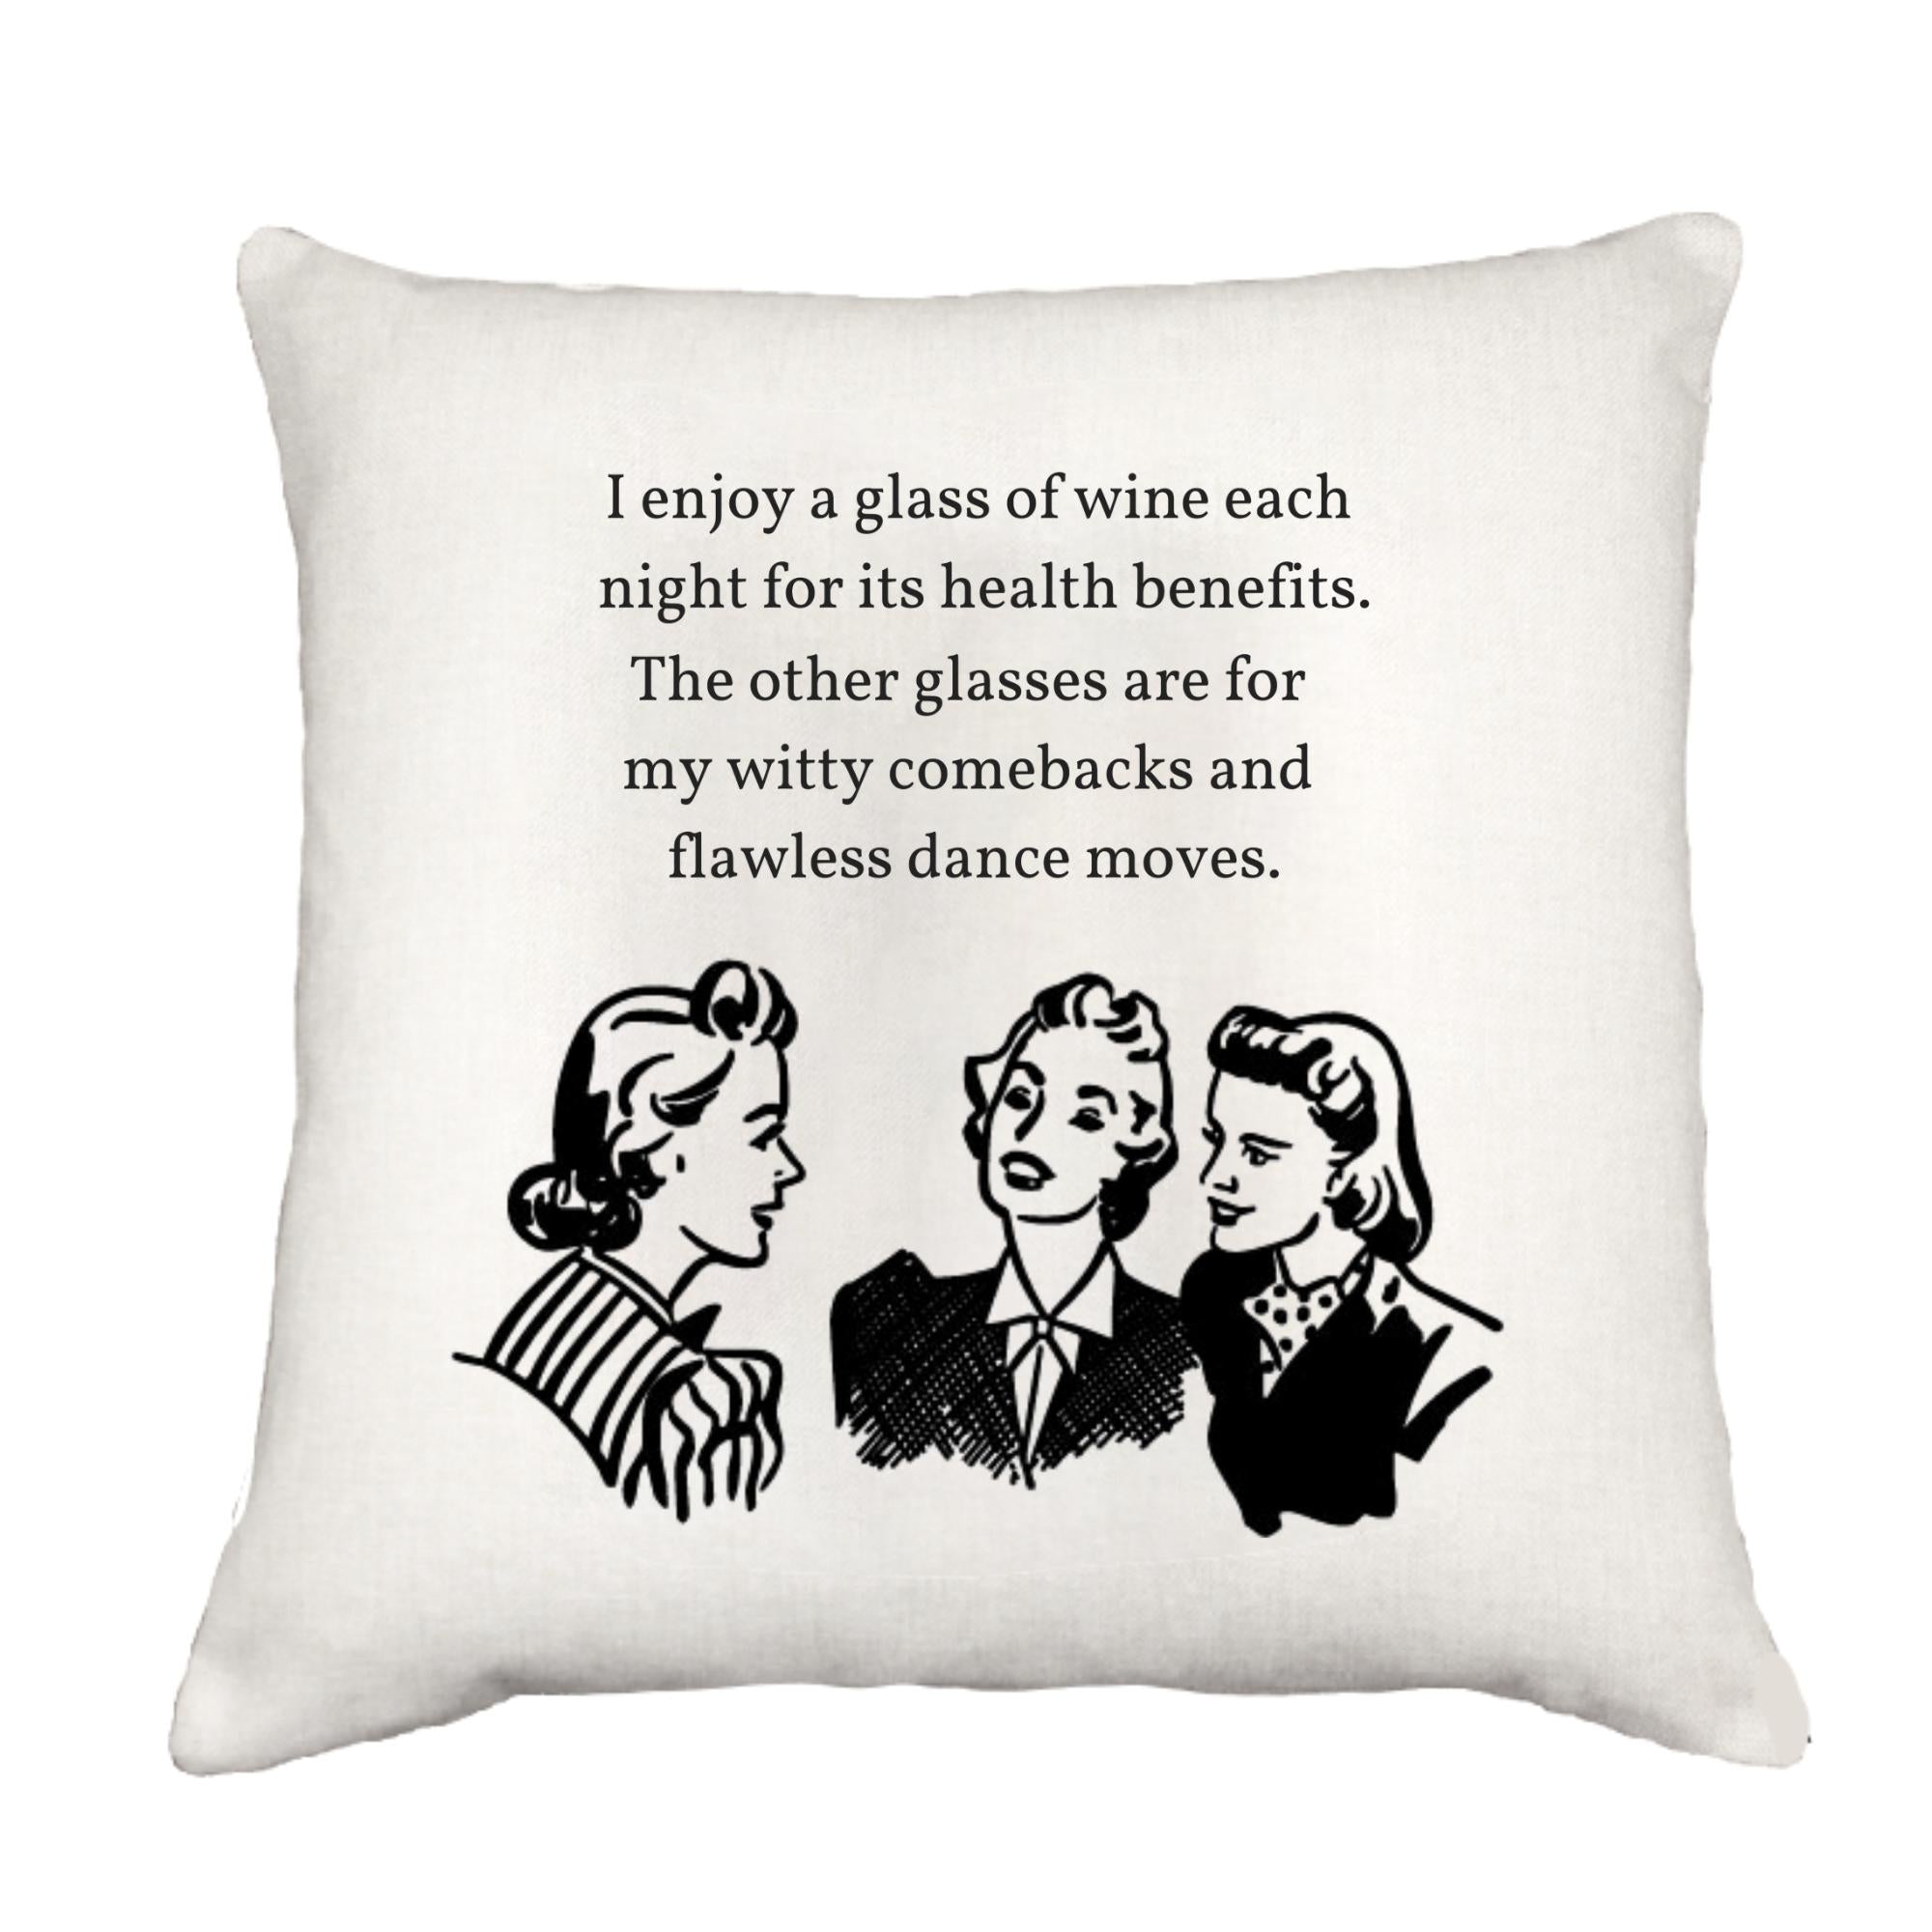 Witty Comebacks Down Pillow